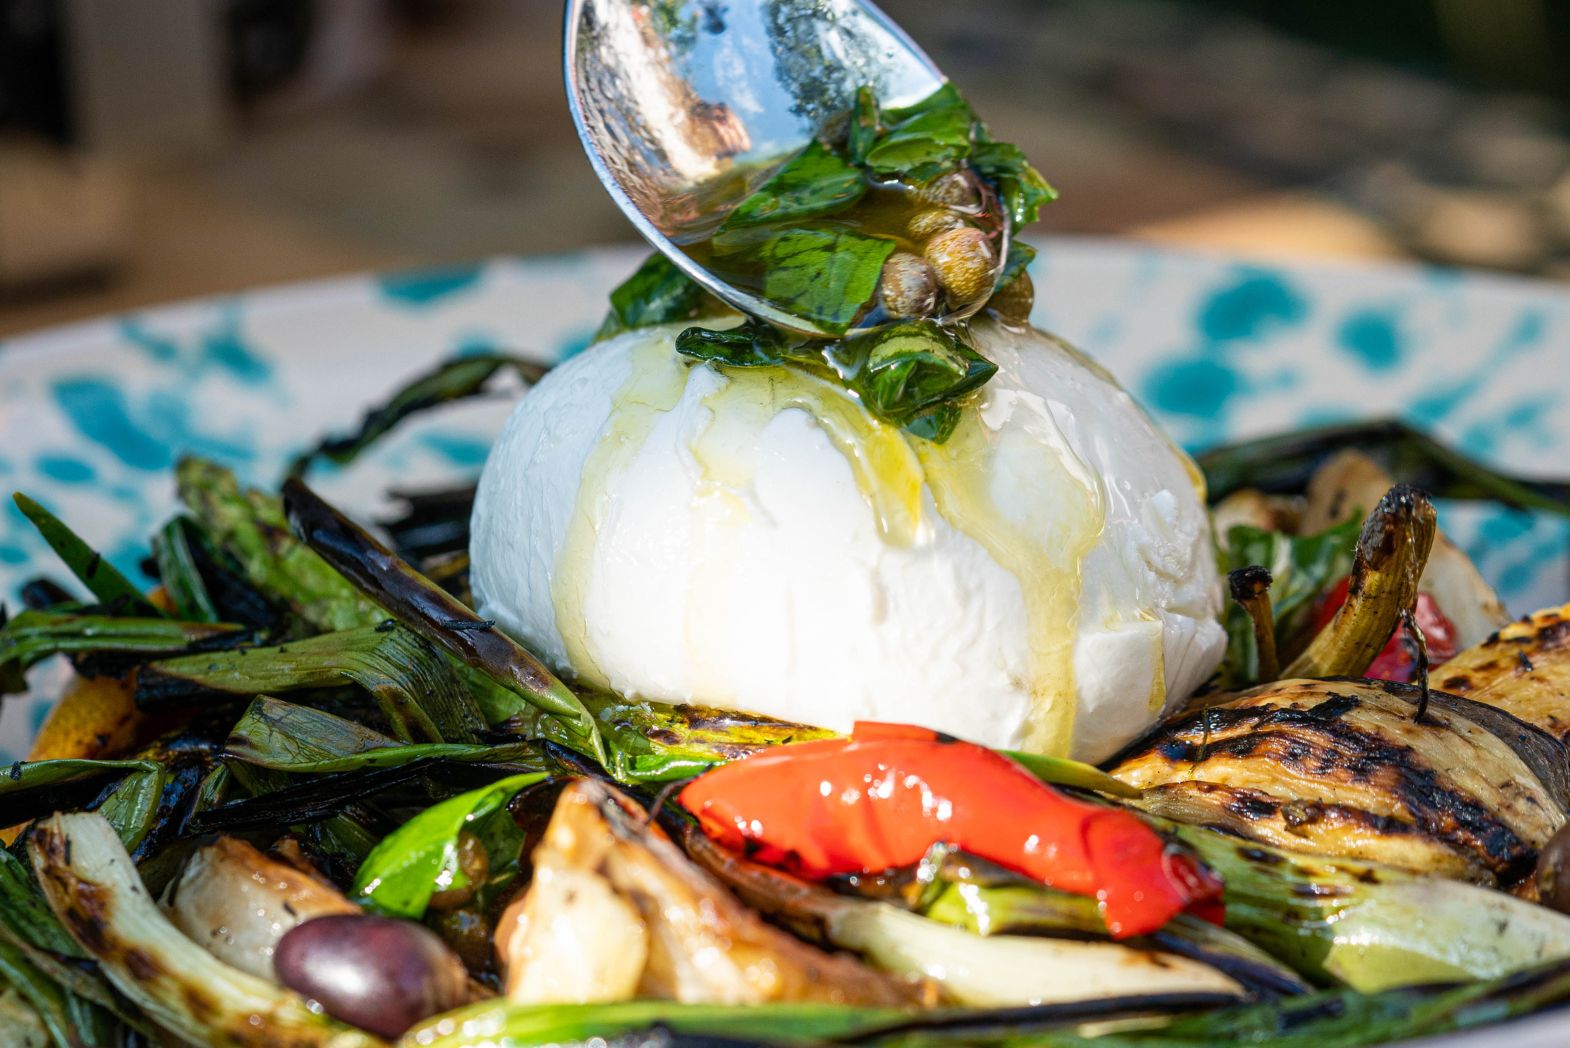 Italian BBQ Vegetables With Grilled Lemon, Basil And Mozzarella